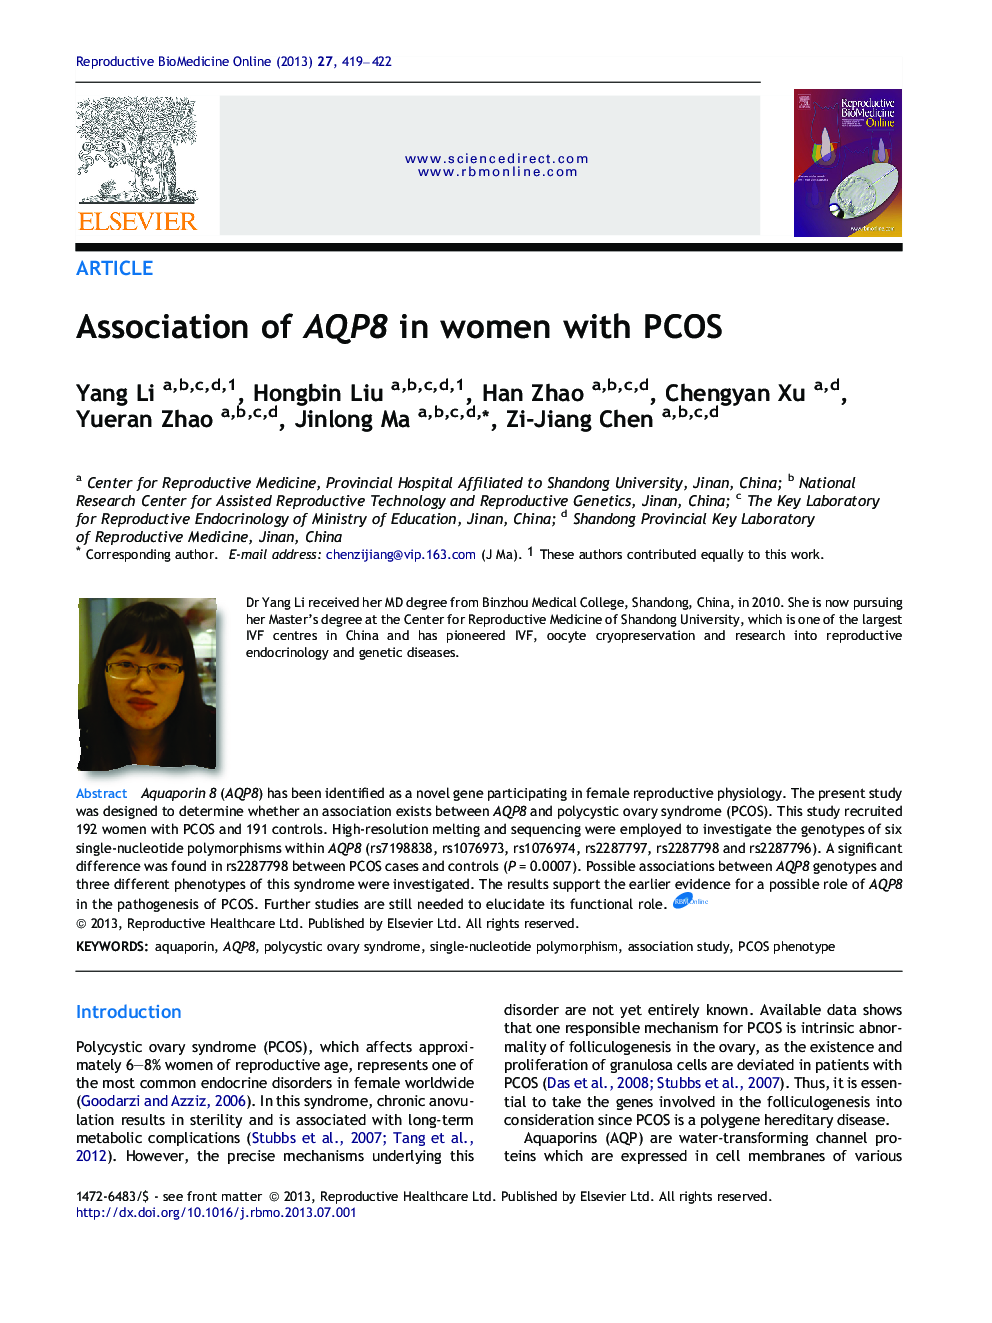 Association of AQP8 in women with PCOS 